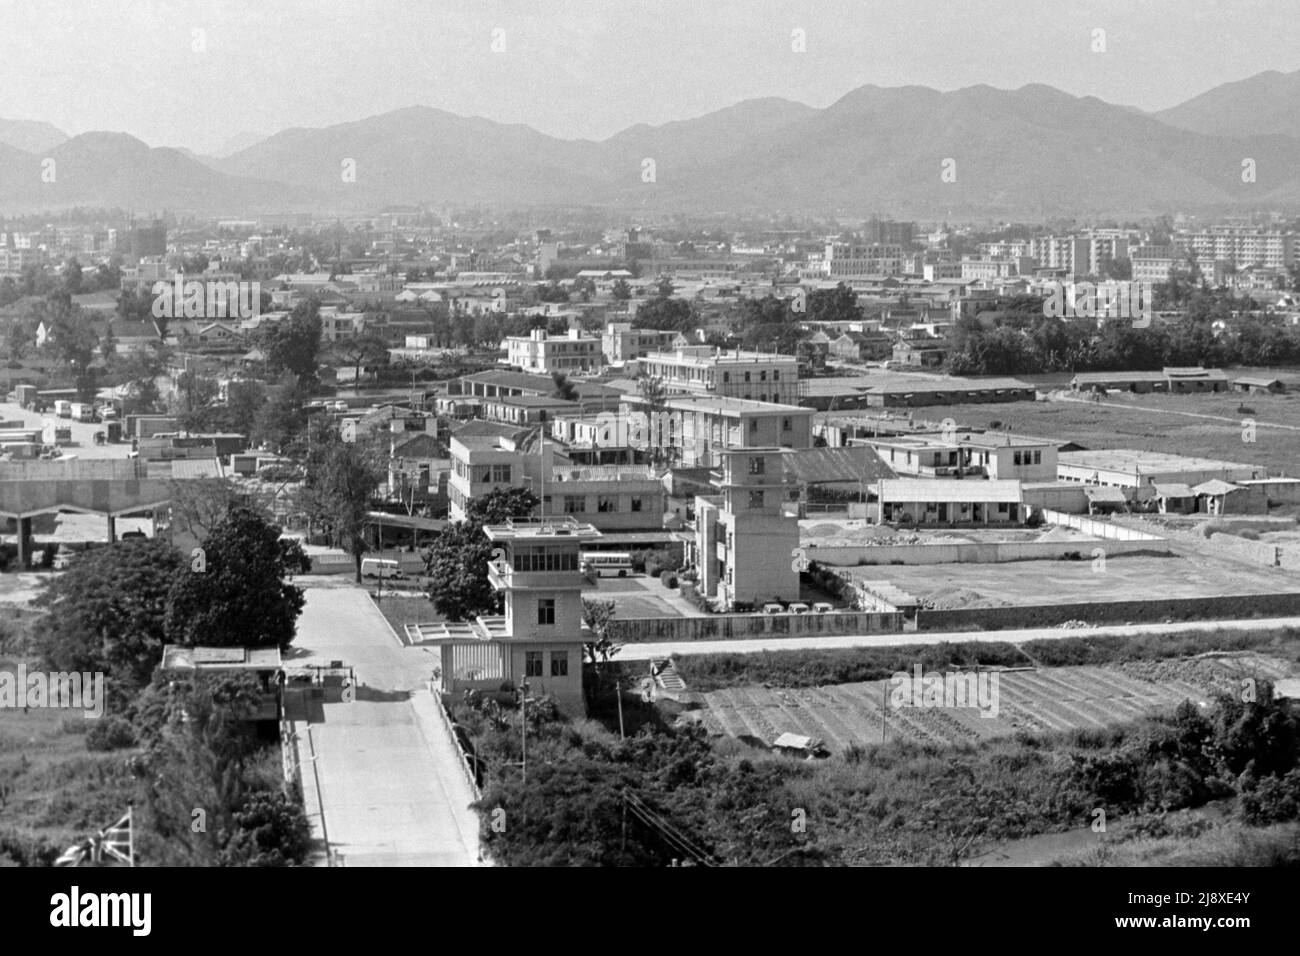 Shenzhen Special Economic Zone (SEZ) Guangdong Province, China, viewed from Man Kam To Police Post, New Territories, Hong Kong. (looking north - October 1981). Man Kam To Bridge is in the lower left of the photo, this is where Chinese Illegal Immigrants were repatriated daily. Stock Photo